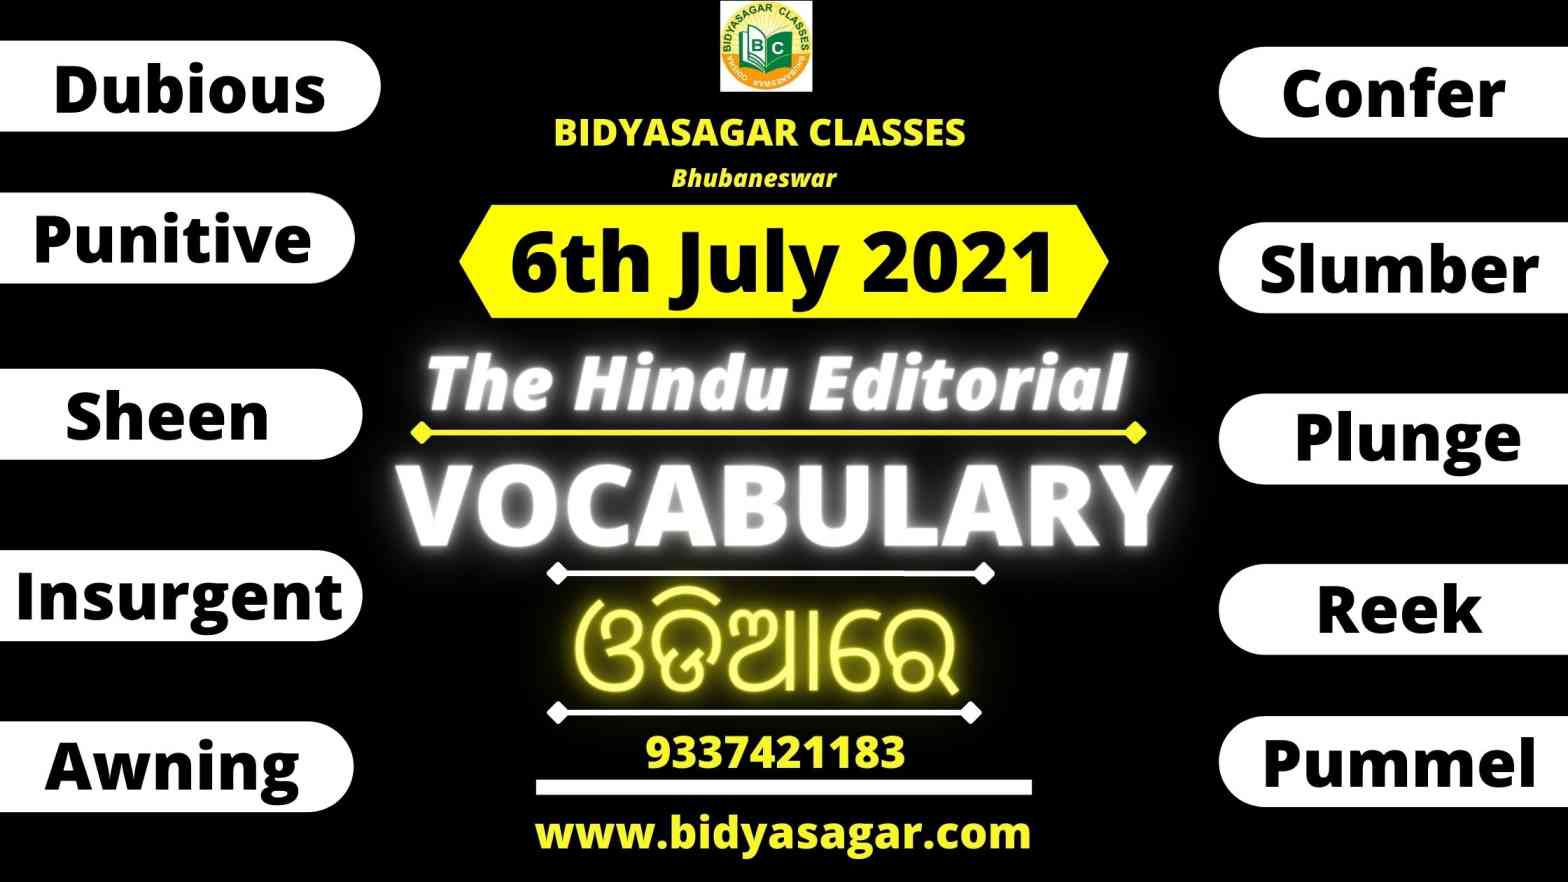 The Hindu Editorial Vocabulary of 6th July 2021